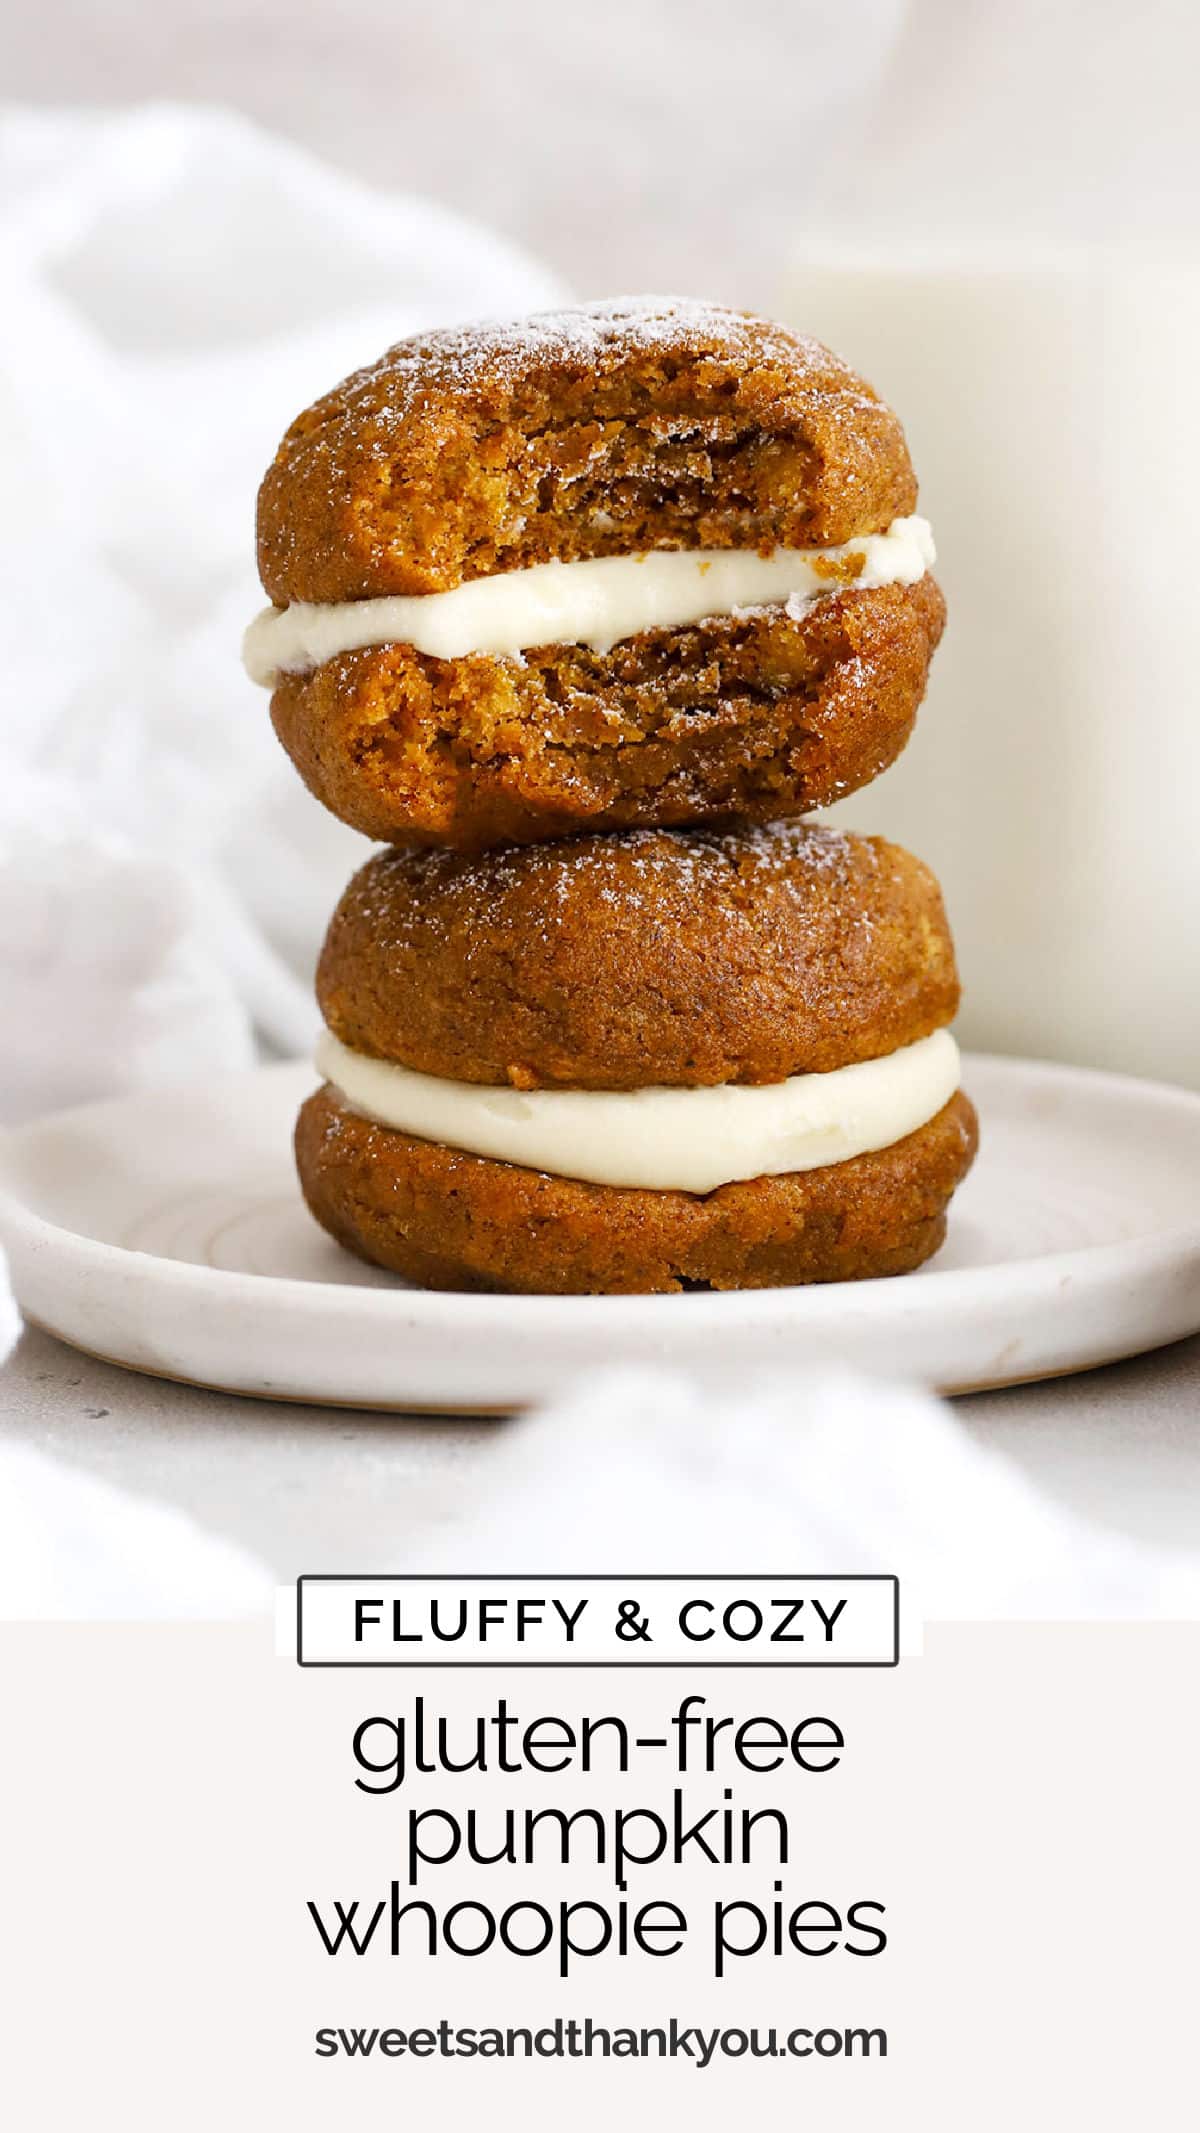 Our Gluten-Free Pumpkin Whoopie Pies are a perfect fall treat, with fluffy cake-like pumpkin cookies & a secret-ingredient cream cheese filling you won't want to miss. / gluten-free pumpkin whoopie pie recipe / homemade pumpkin whoopie pies / gluten-free thanksgiving dessert / gluten-free fall dessert / gluten-free pumpkin dessert / gluten-free pumpkin cookies / gluten-free thanksgiving dessert besides pie / cream cheese frosting recipe / gluten-free holiday cookie / 